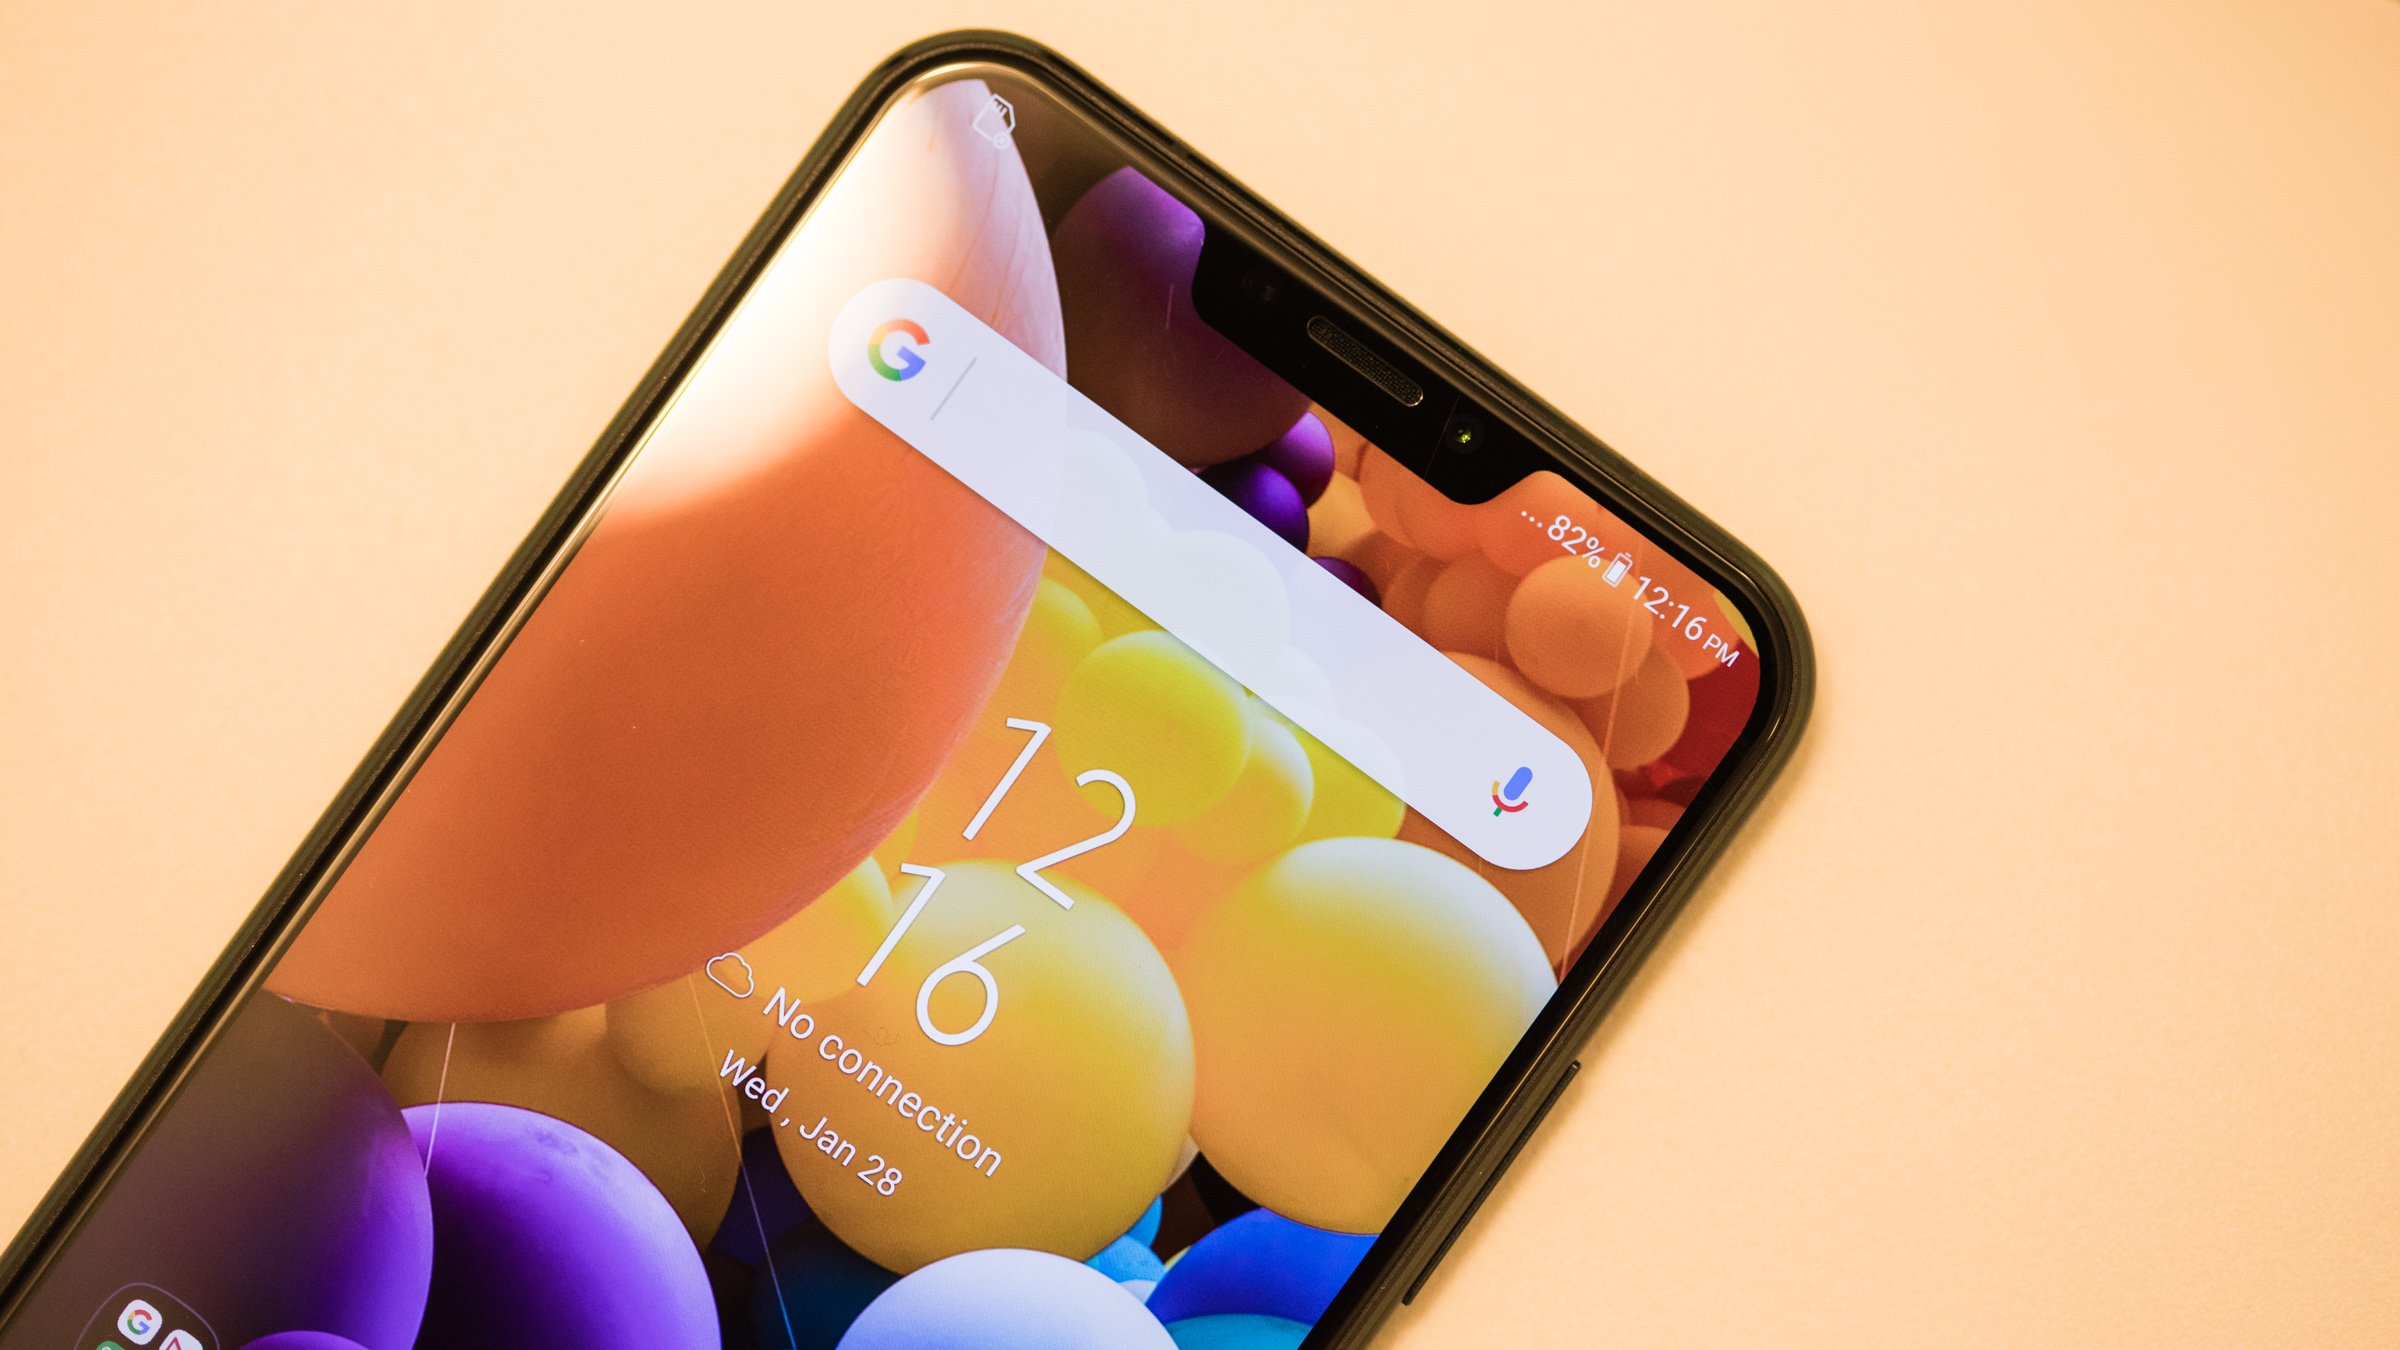 Zenfone 5z running Android 9 Pie appears in benchmark test